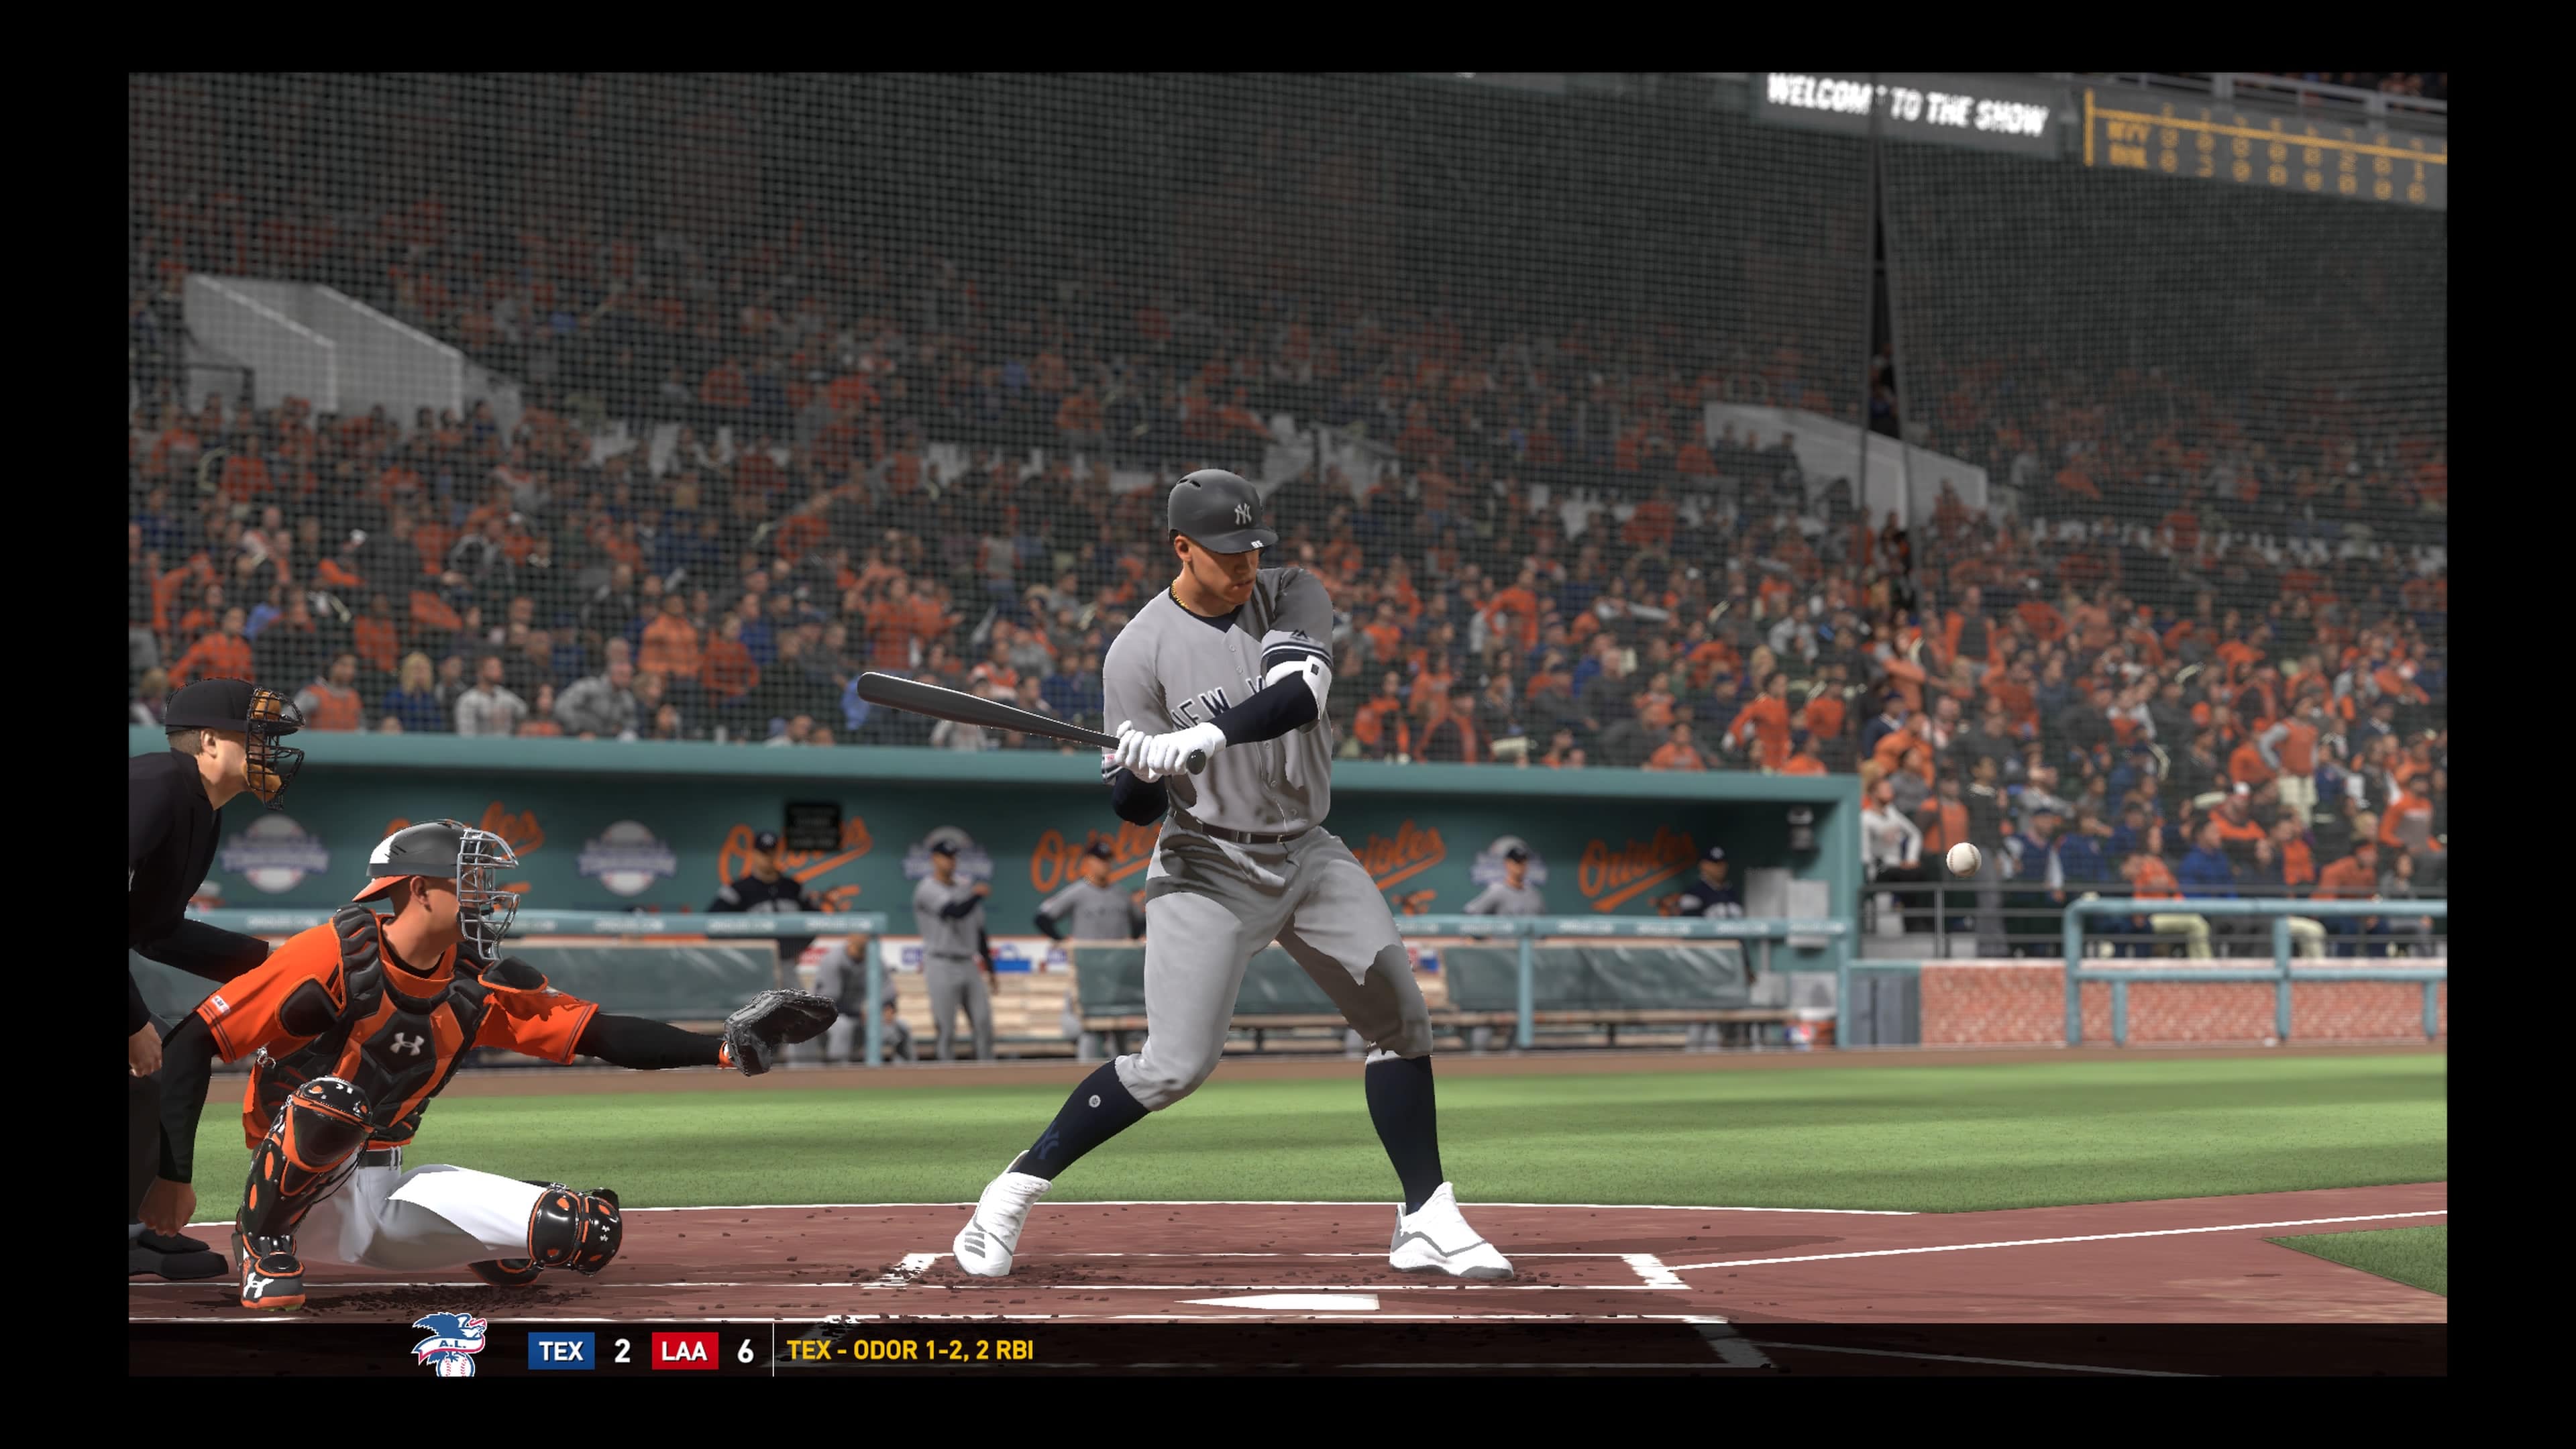 Mlb the show 19